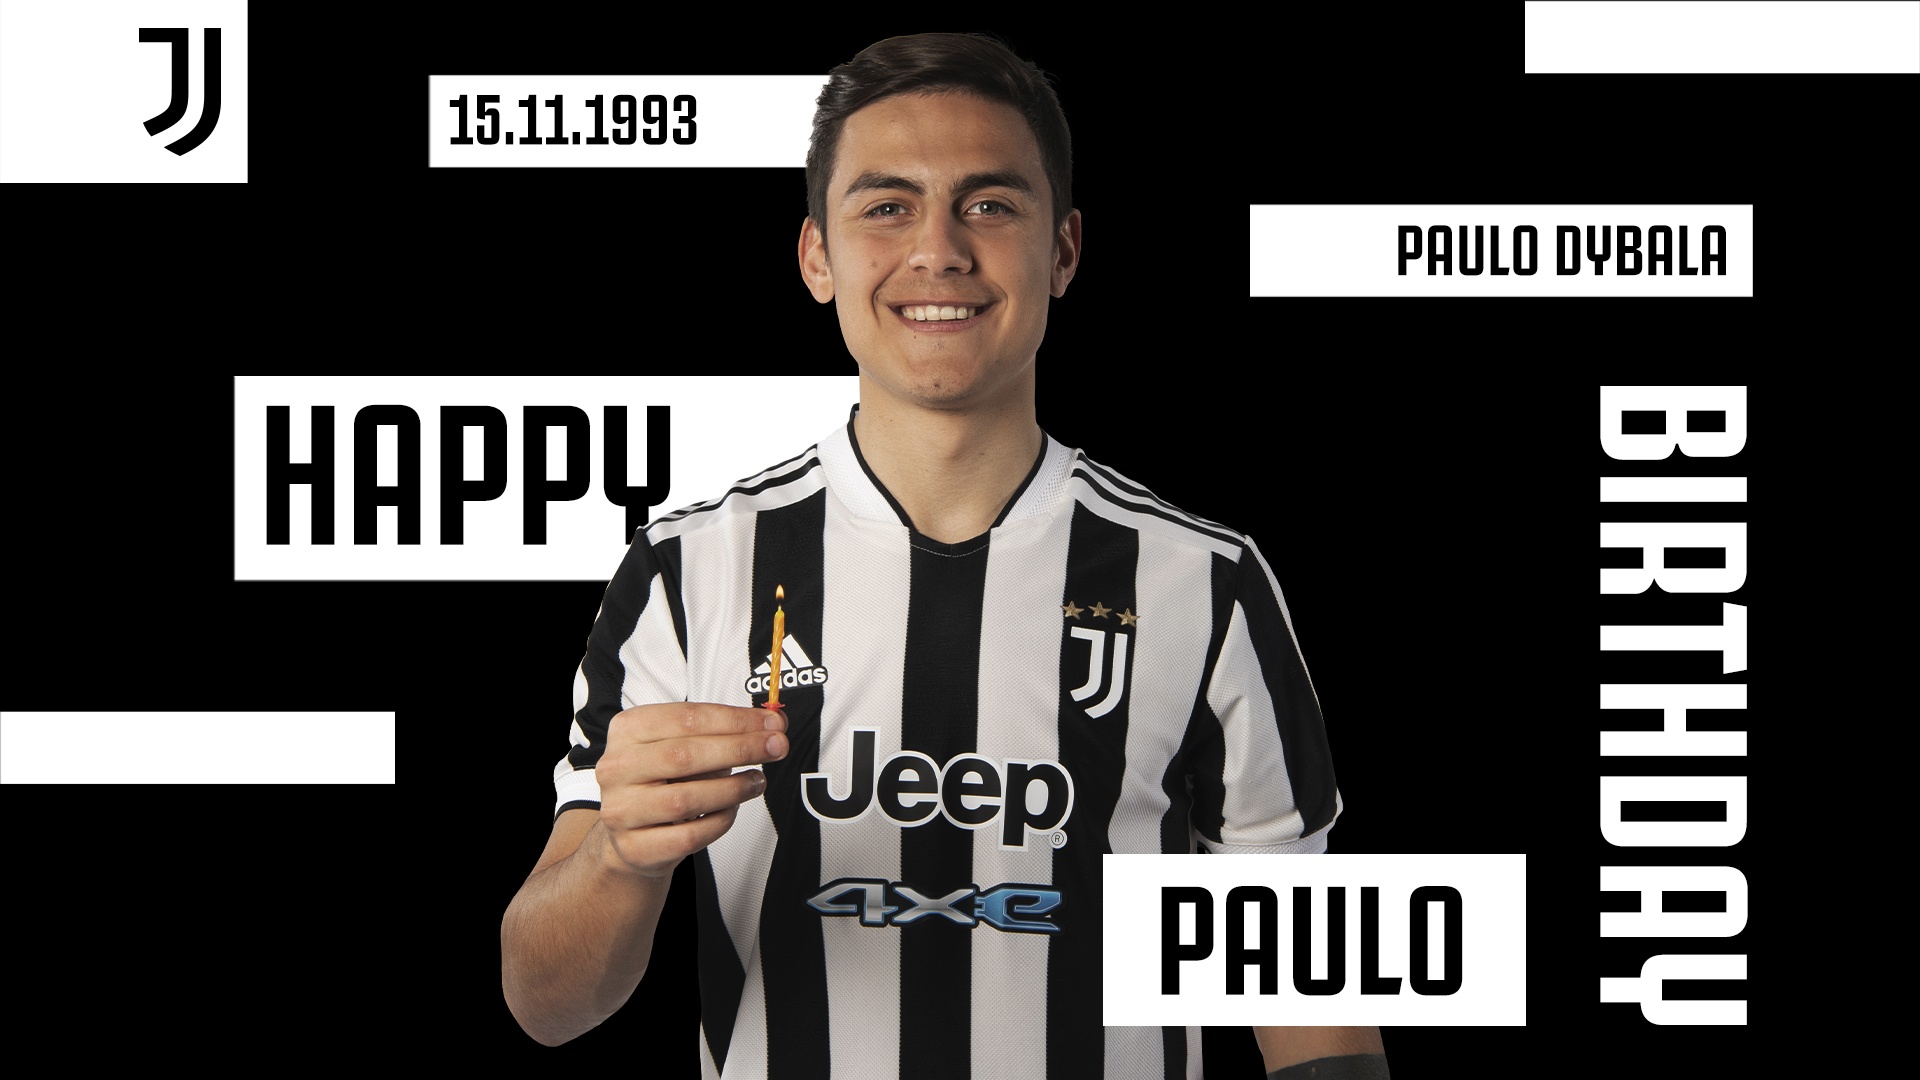 Dybala turns 28 years old: Juventus wishes him a happy birthday in style